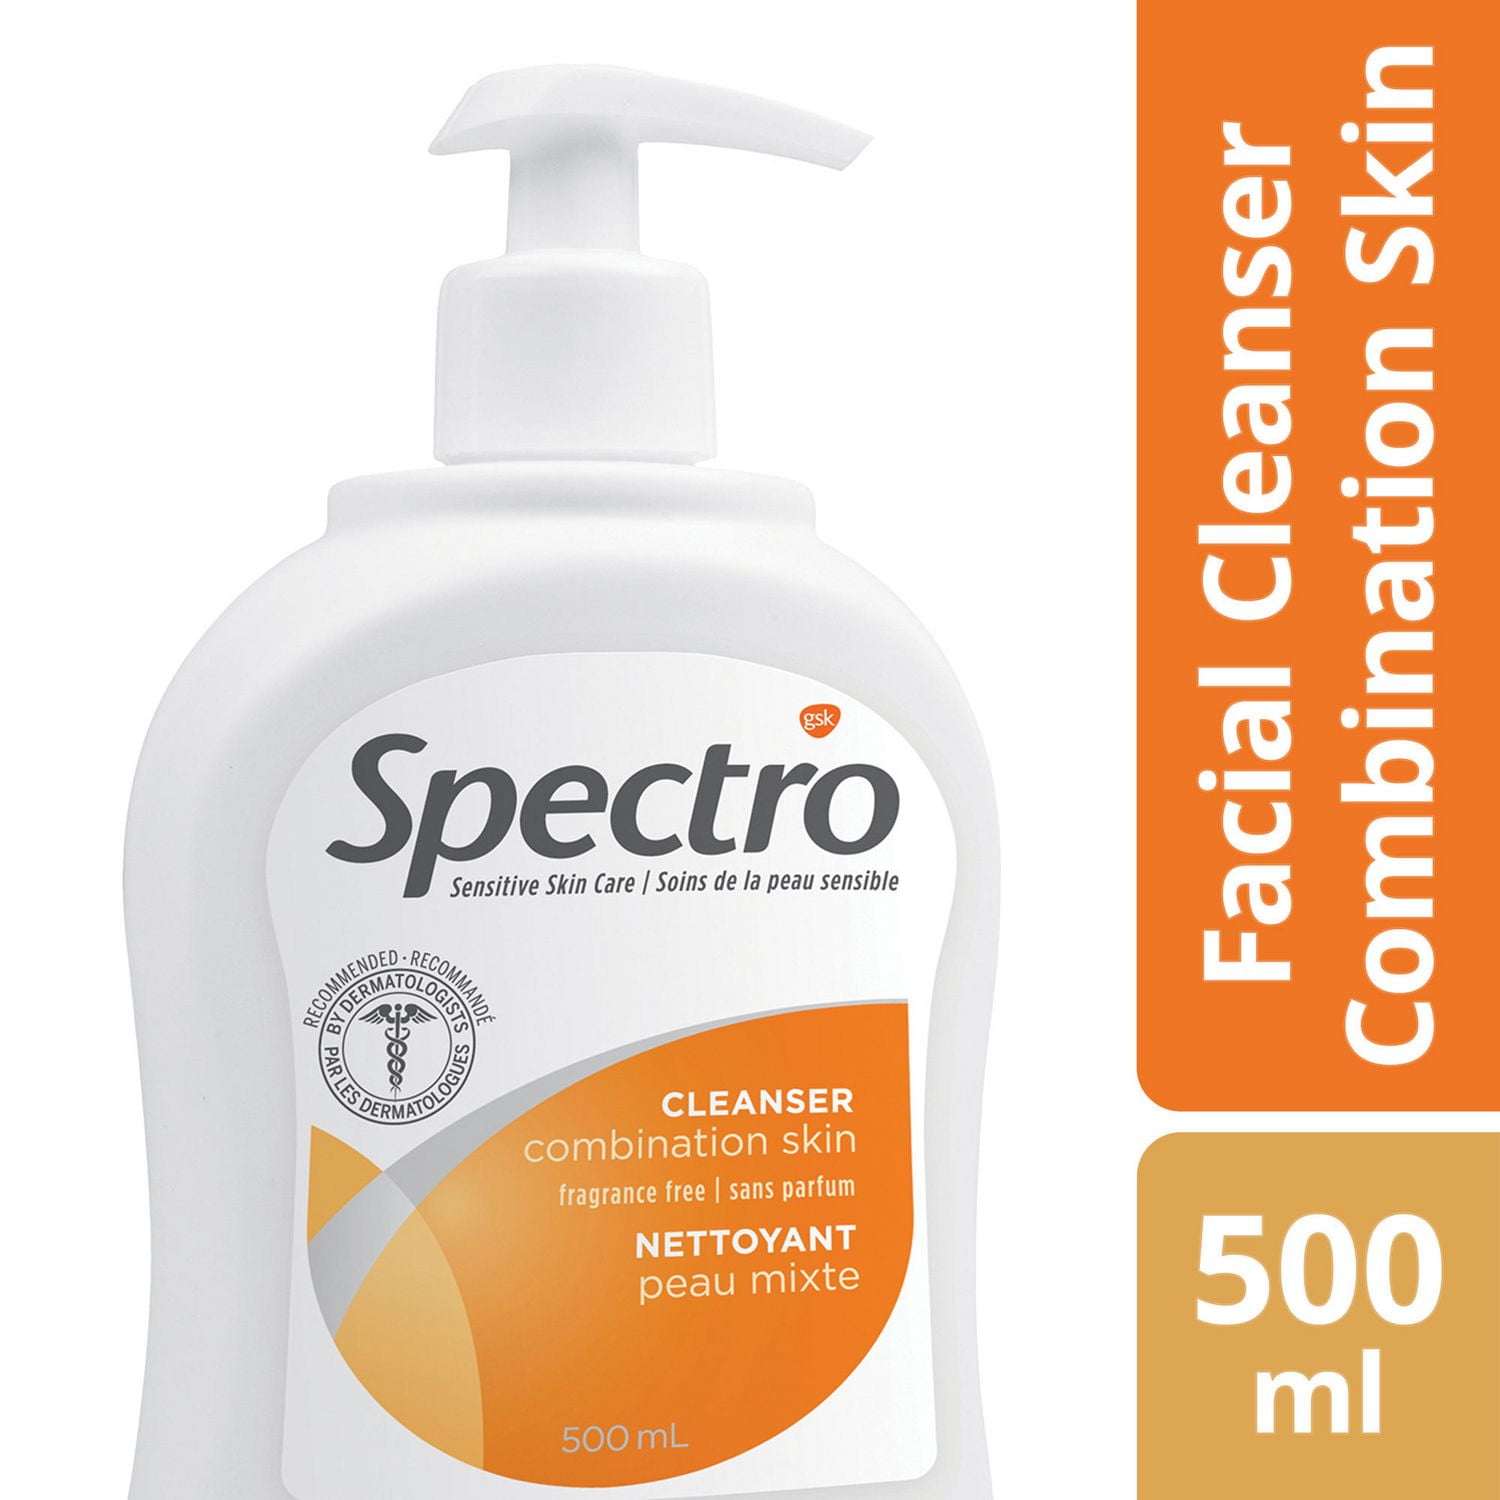 Spectro Cleanser - Reviews